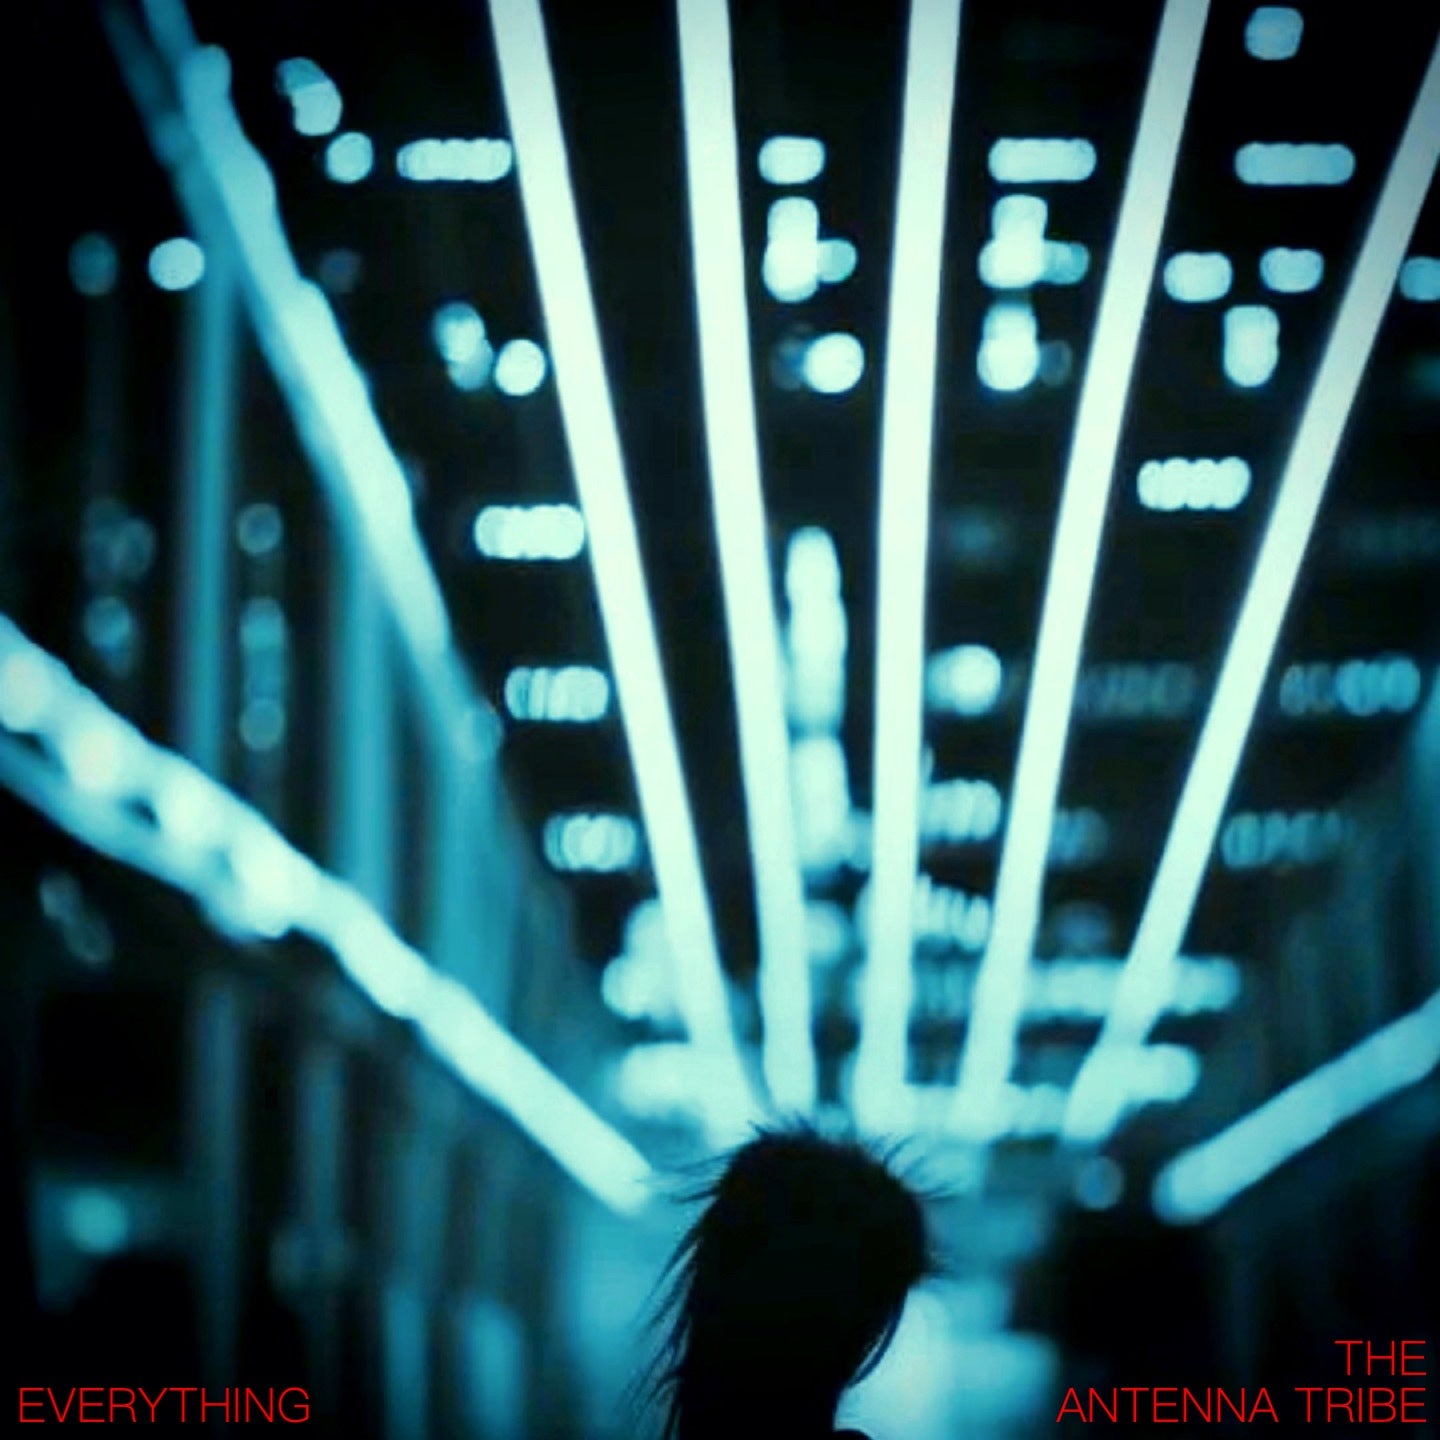 The Antenna Tribe - ‘Everything’